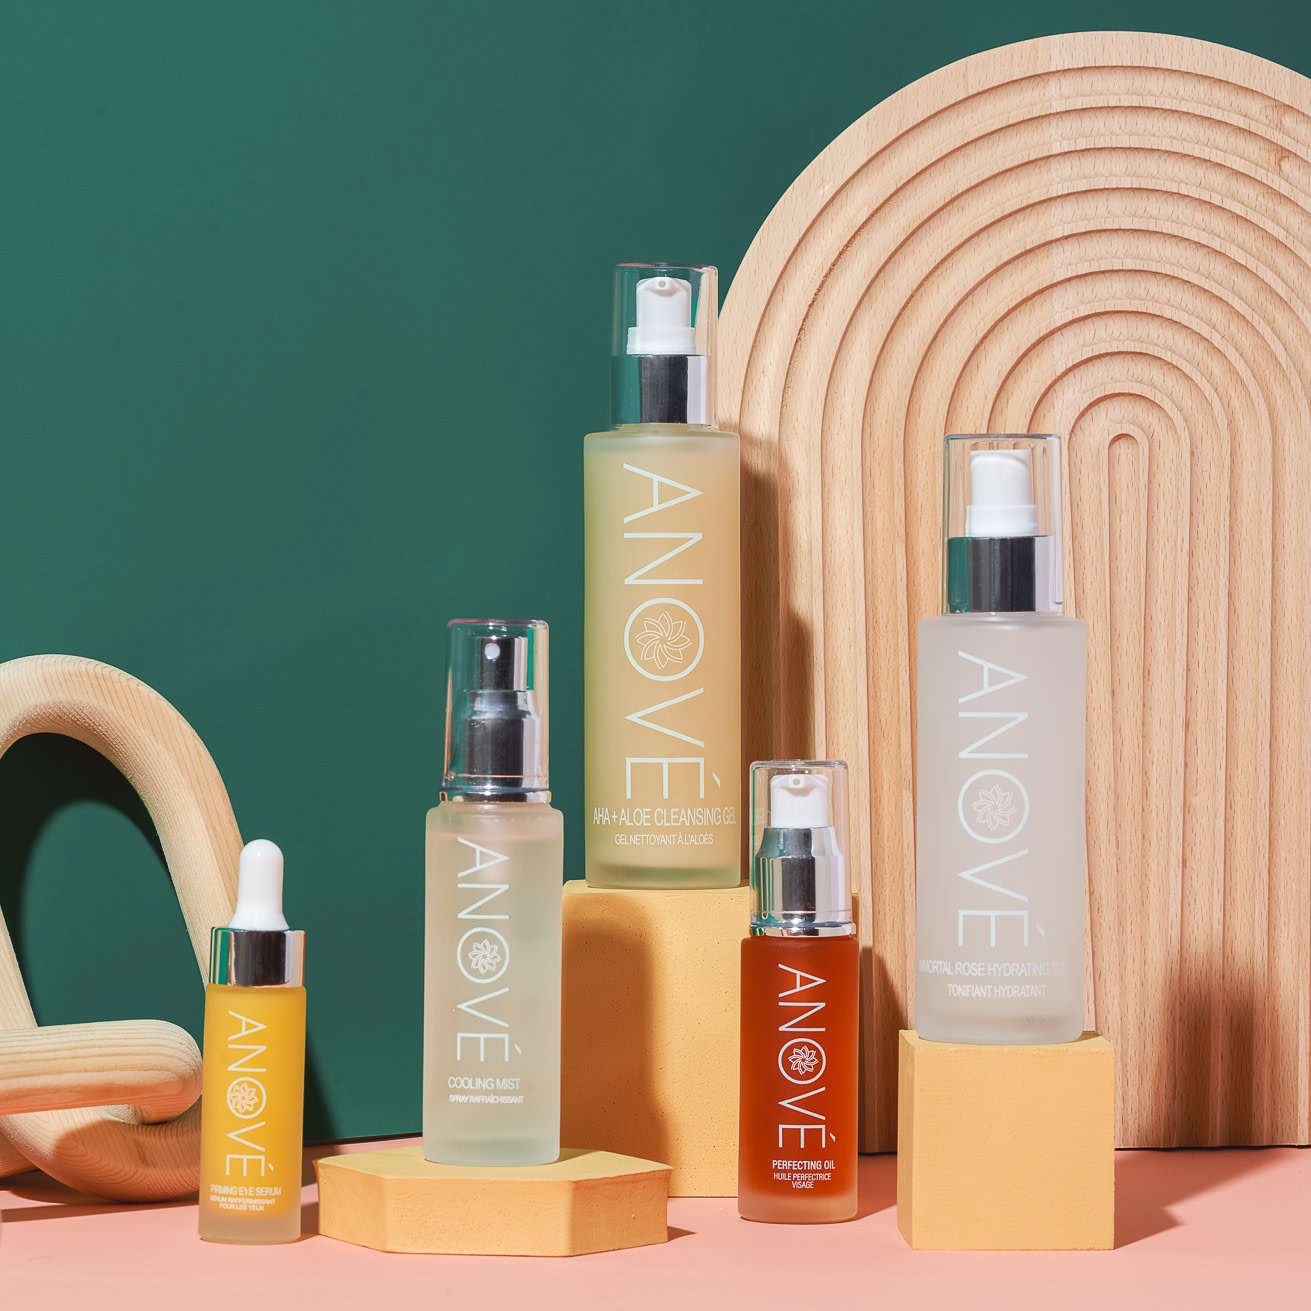 All ANOVÉ products